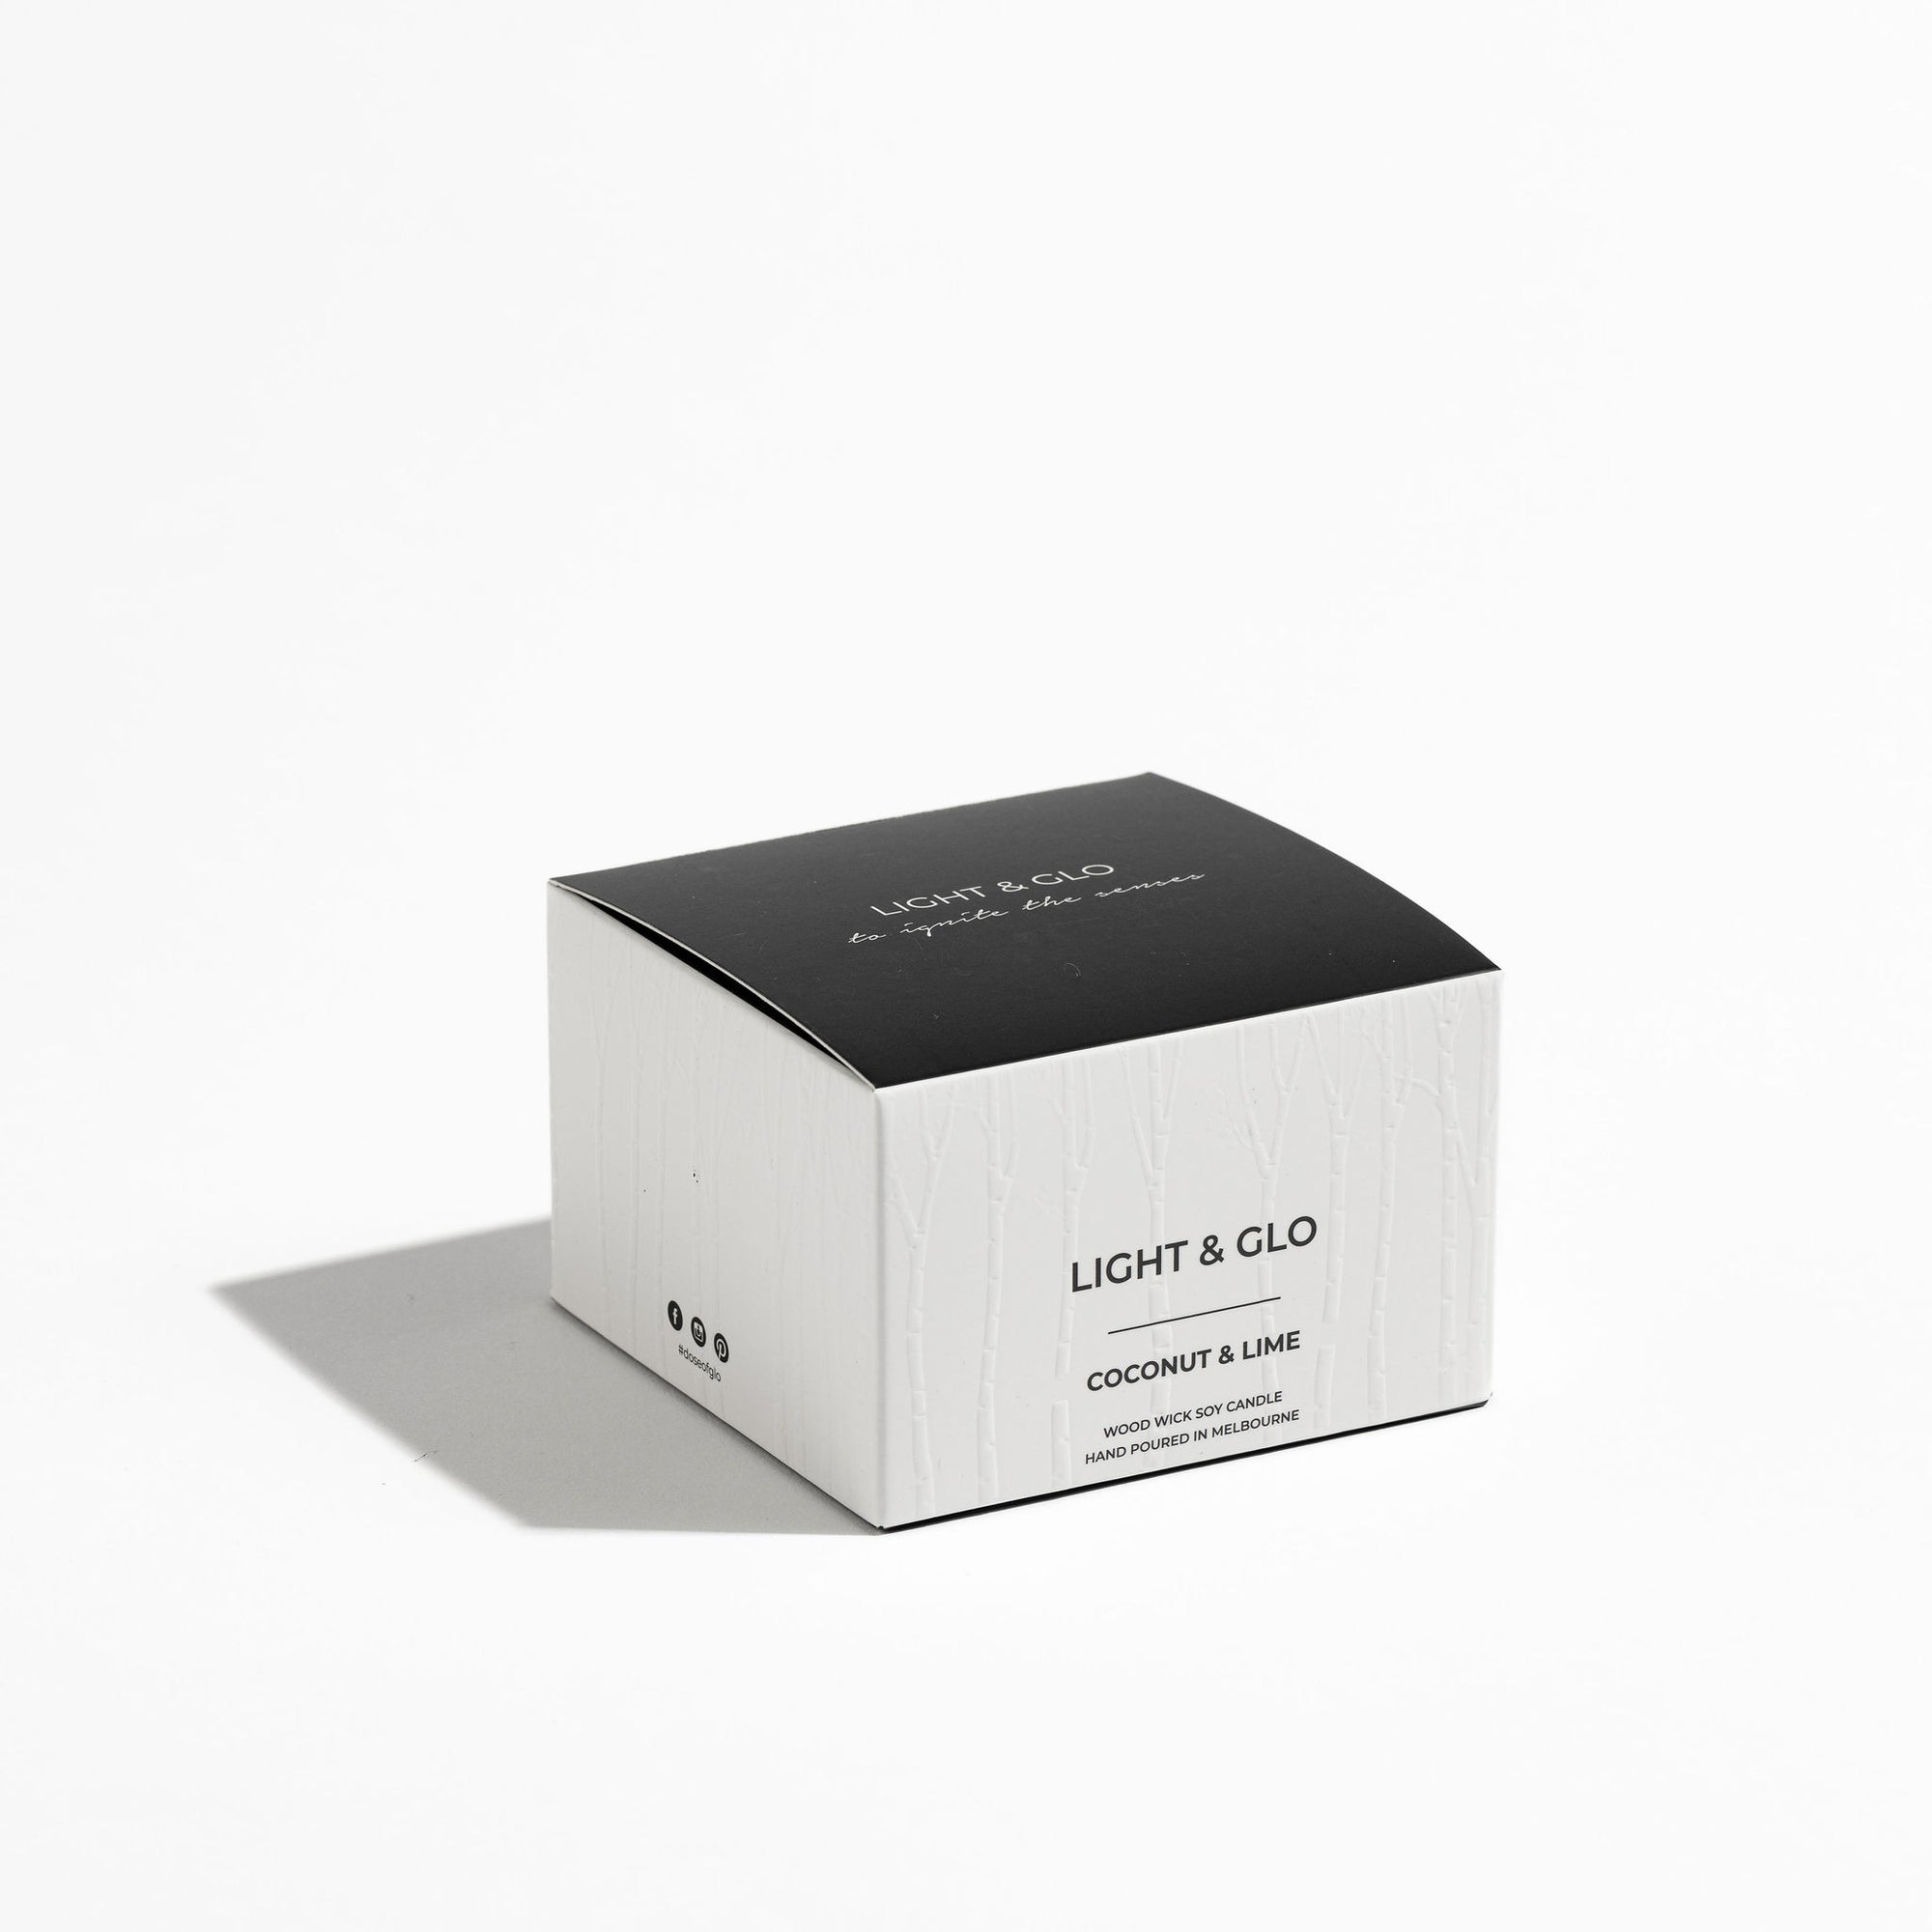 Coconut & Lime - Monochrome Travel Candle | Luxury Candles & Home Fragrances by Light + Glo